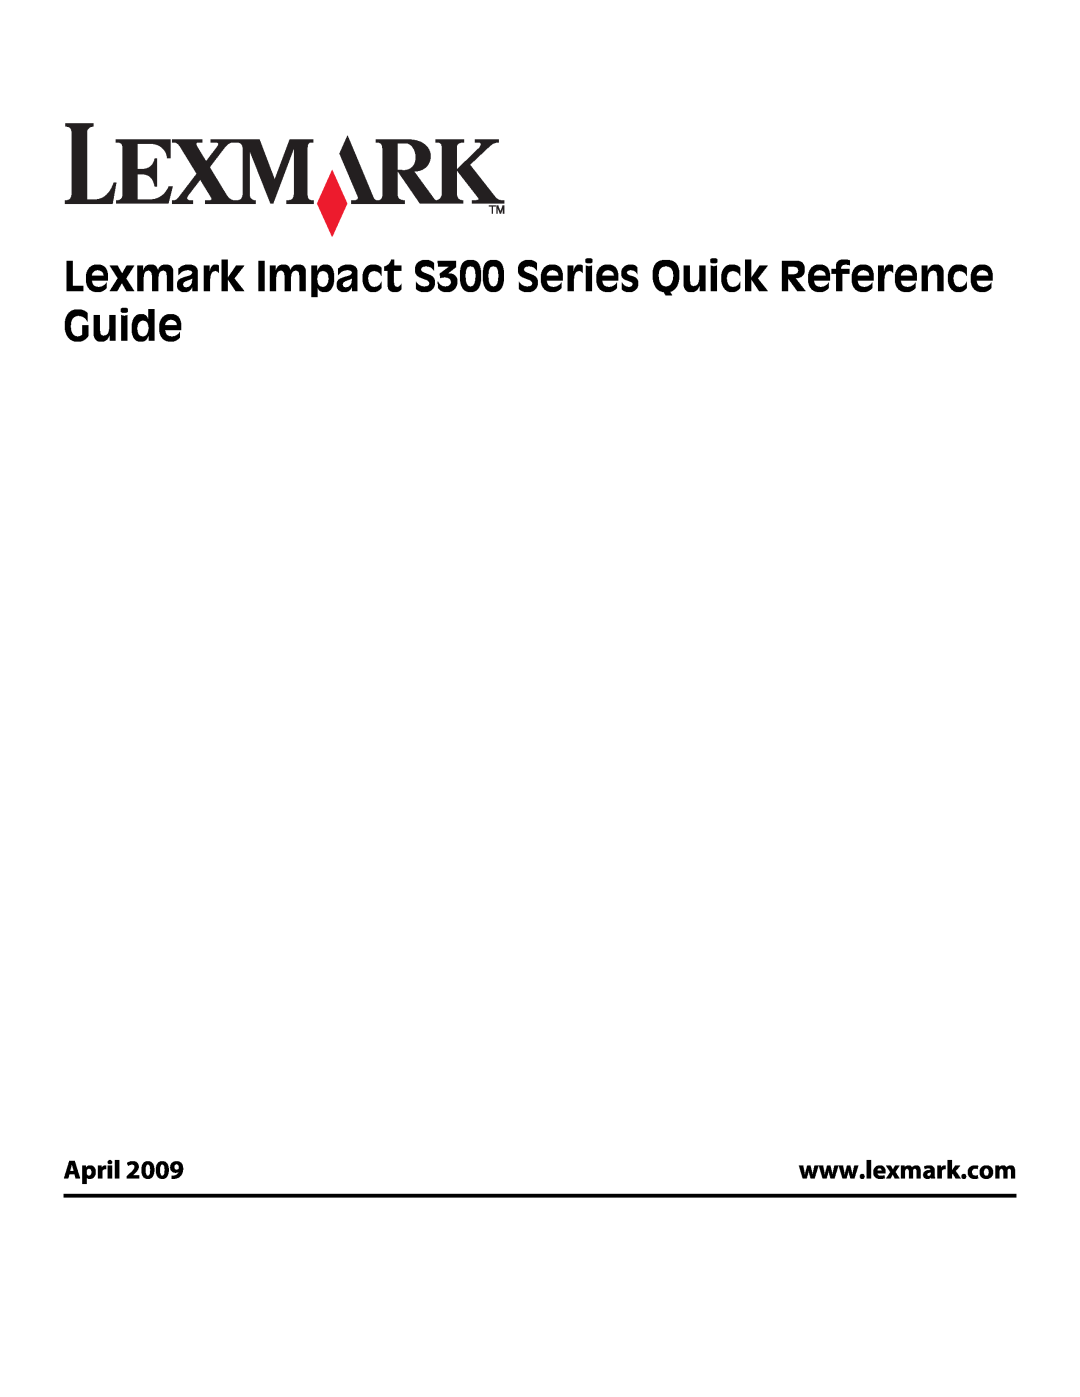 Lexmark manual Lexmark Impact S300 Series Quick Reference Guide, April 